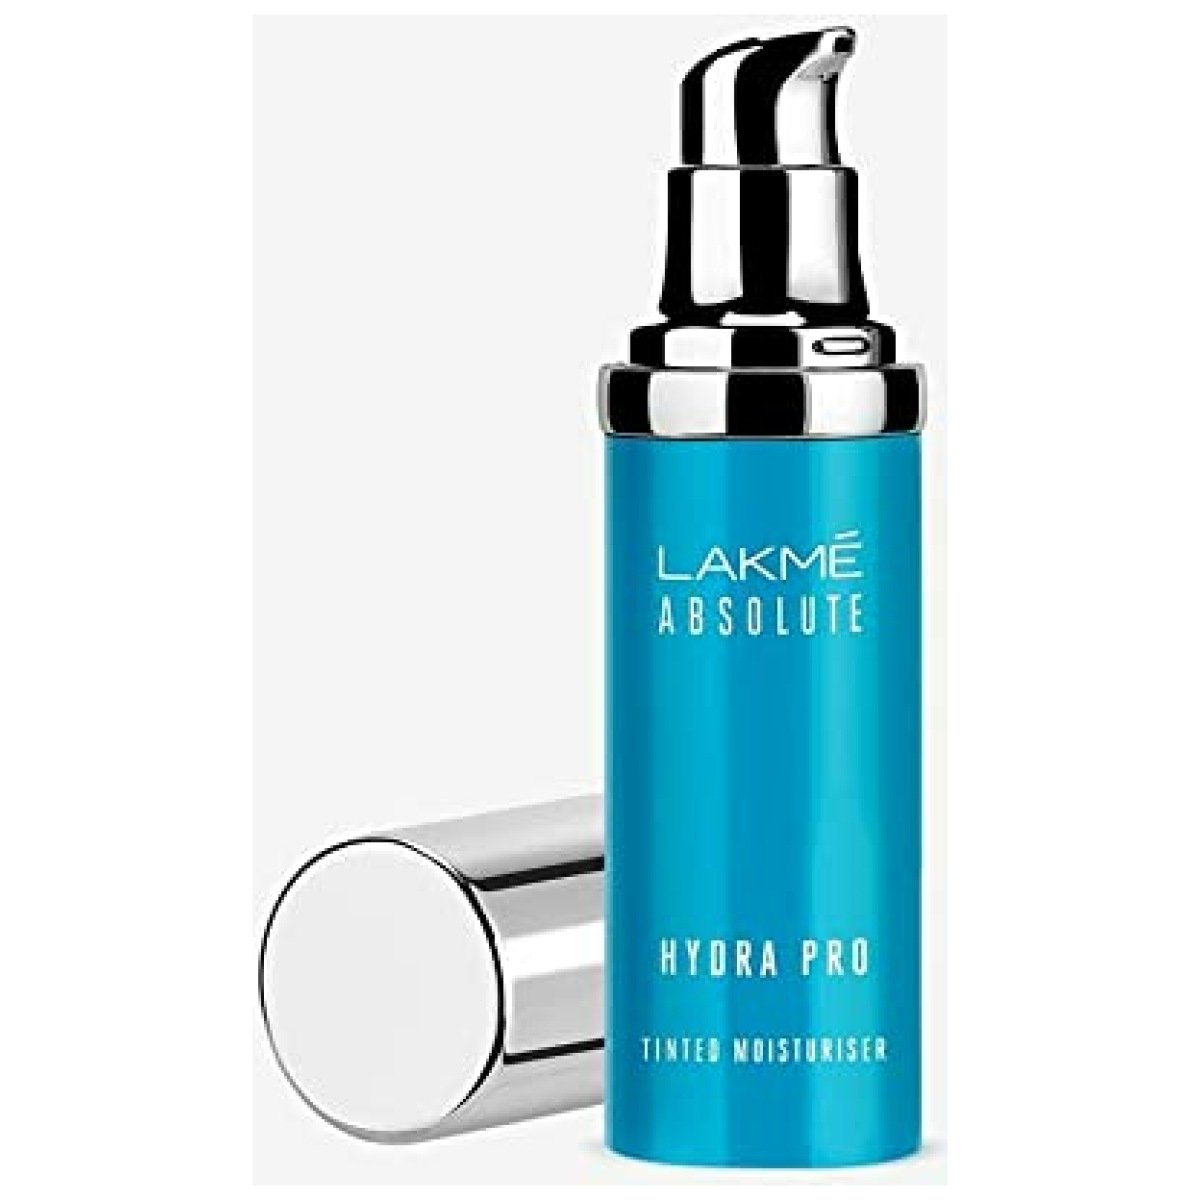 LAKMÉ Absolute Hydra Pro Tinted Face Moisturiser with Hyaluronic  30 g